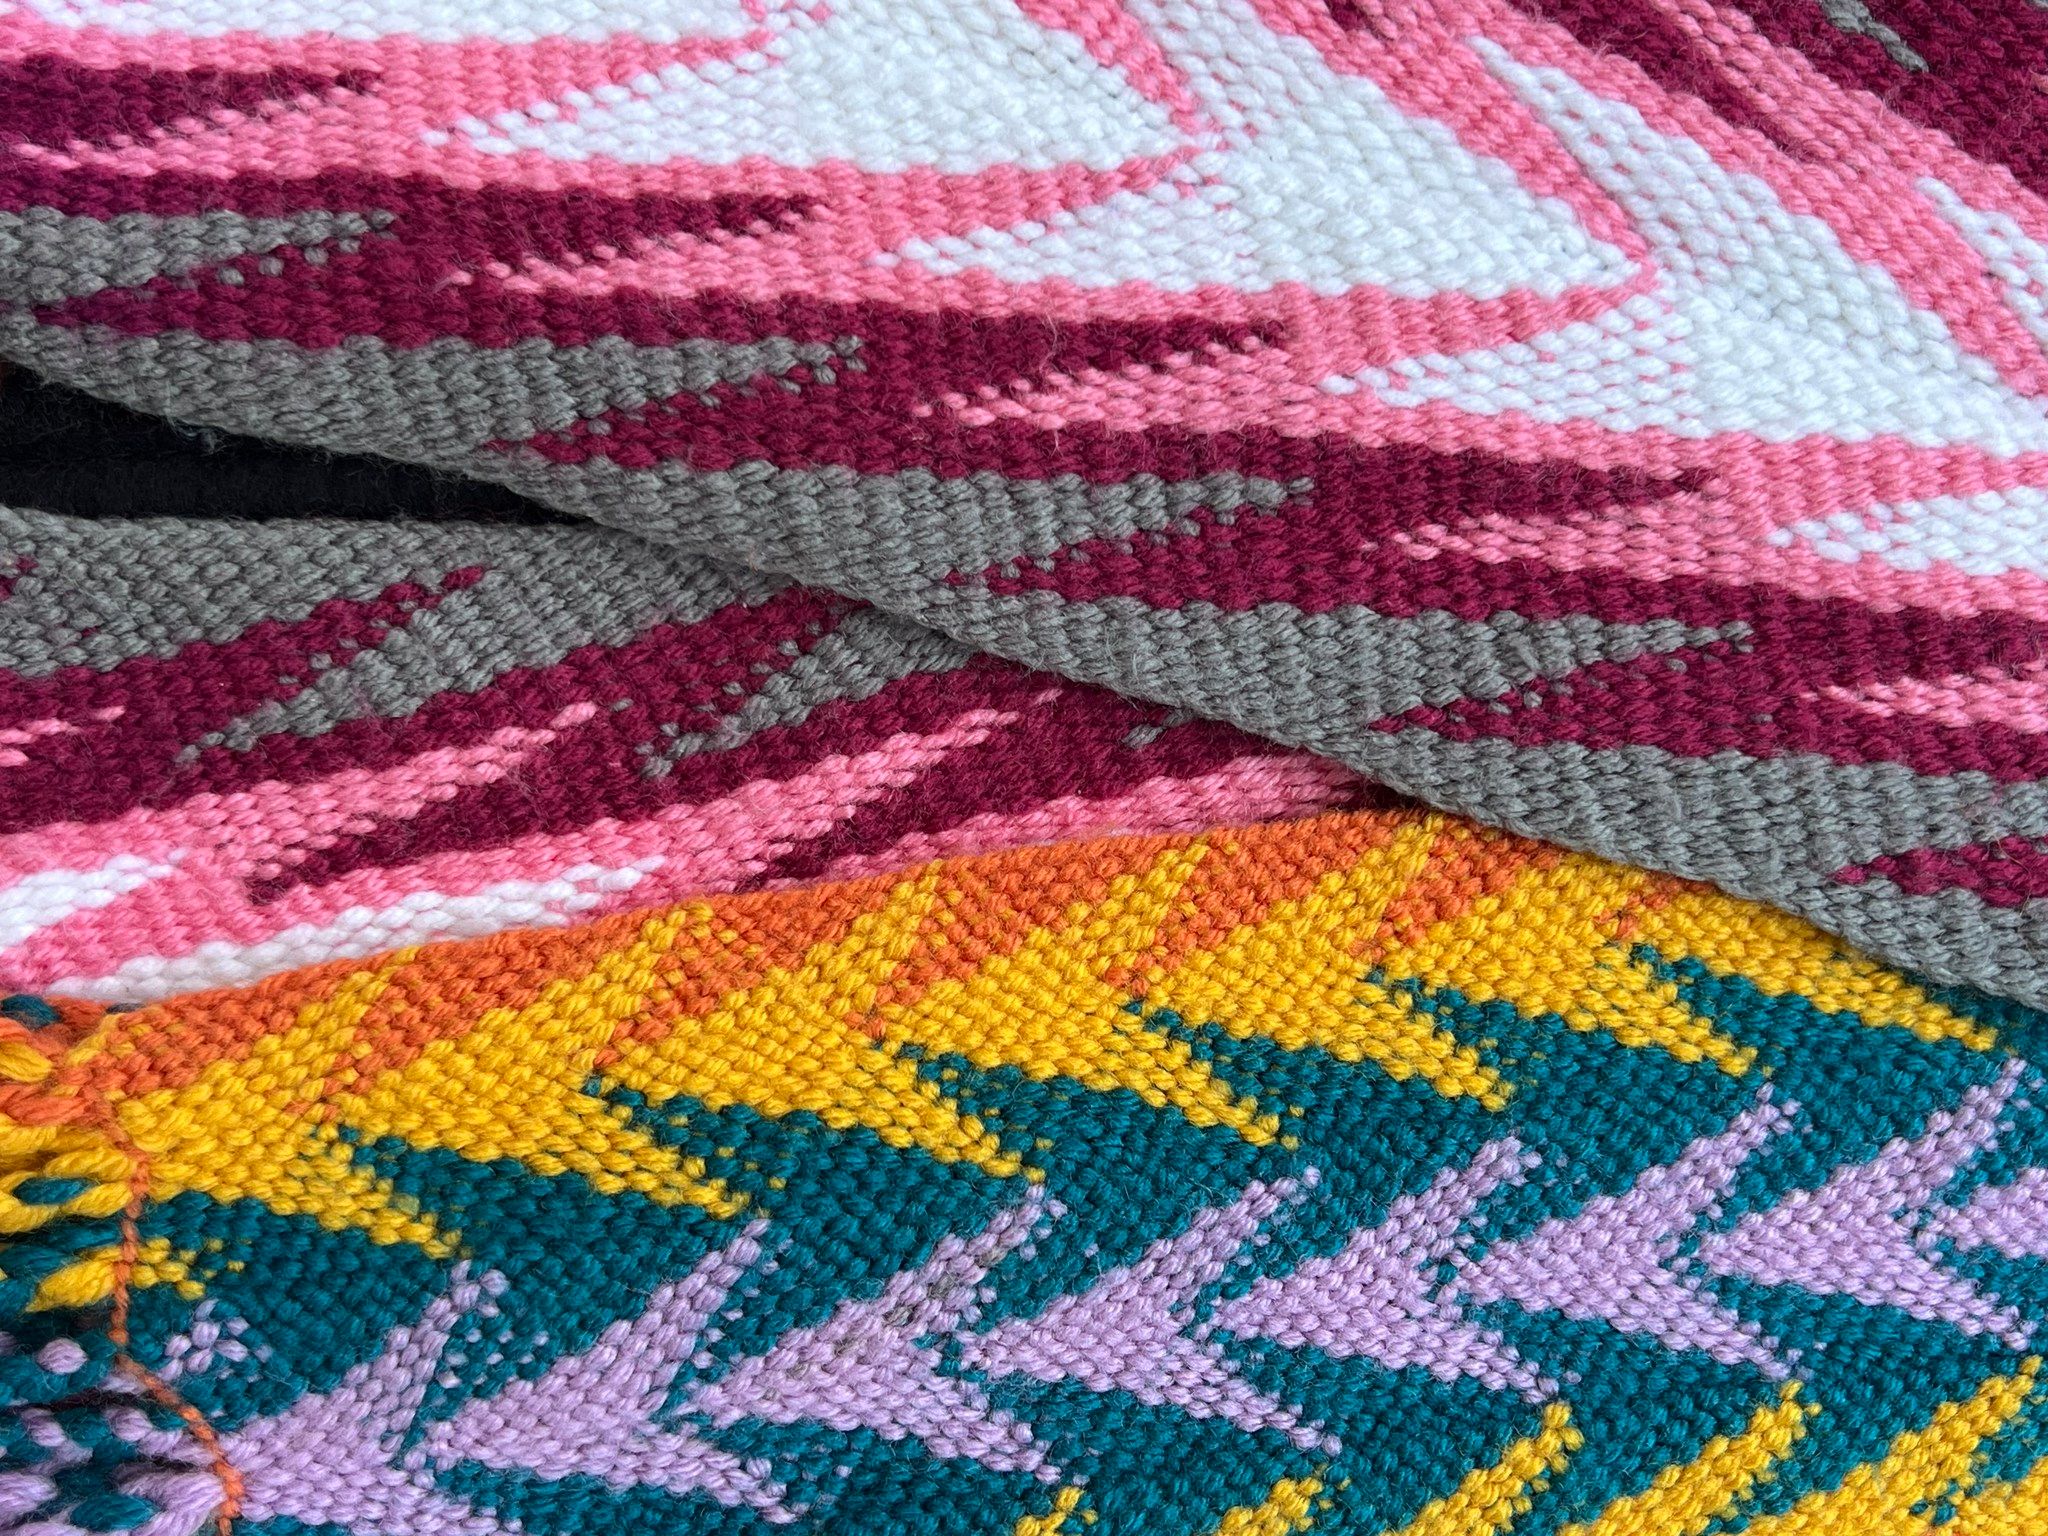 A close up image of colorful, geometric, woven fabric